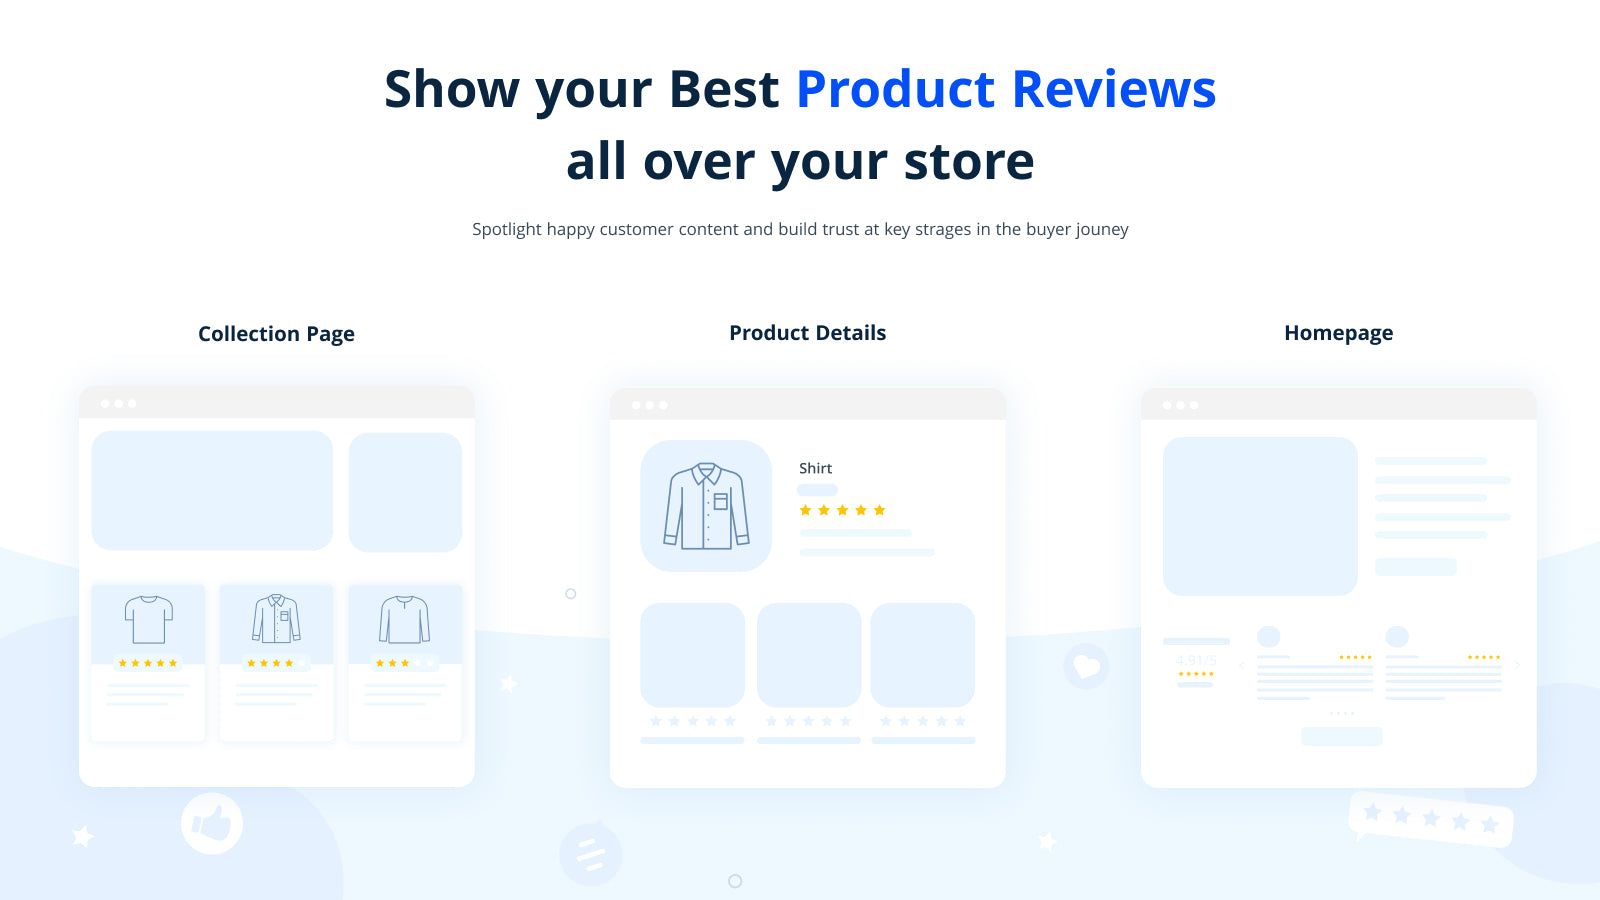 Show your best product reviews all over your store